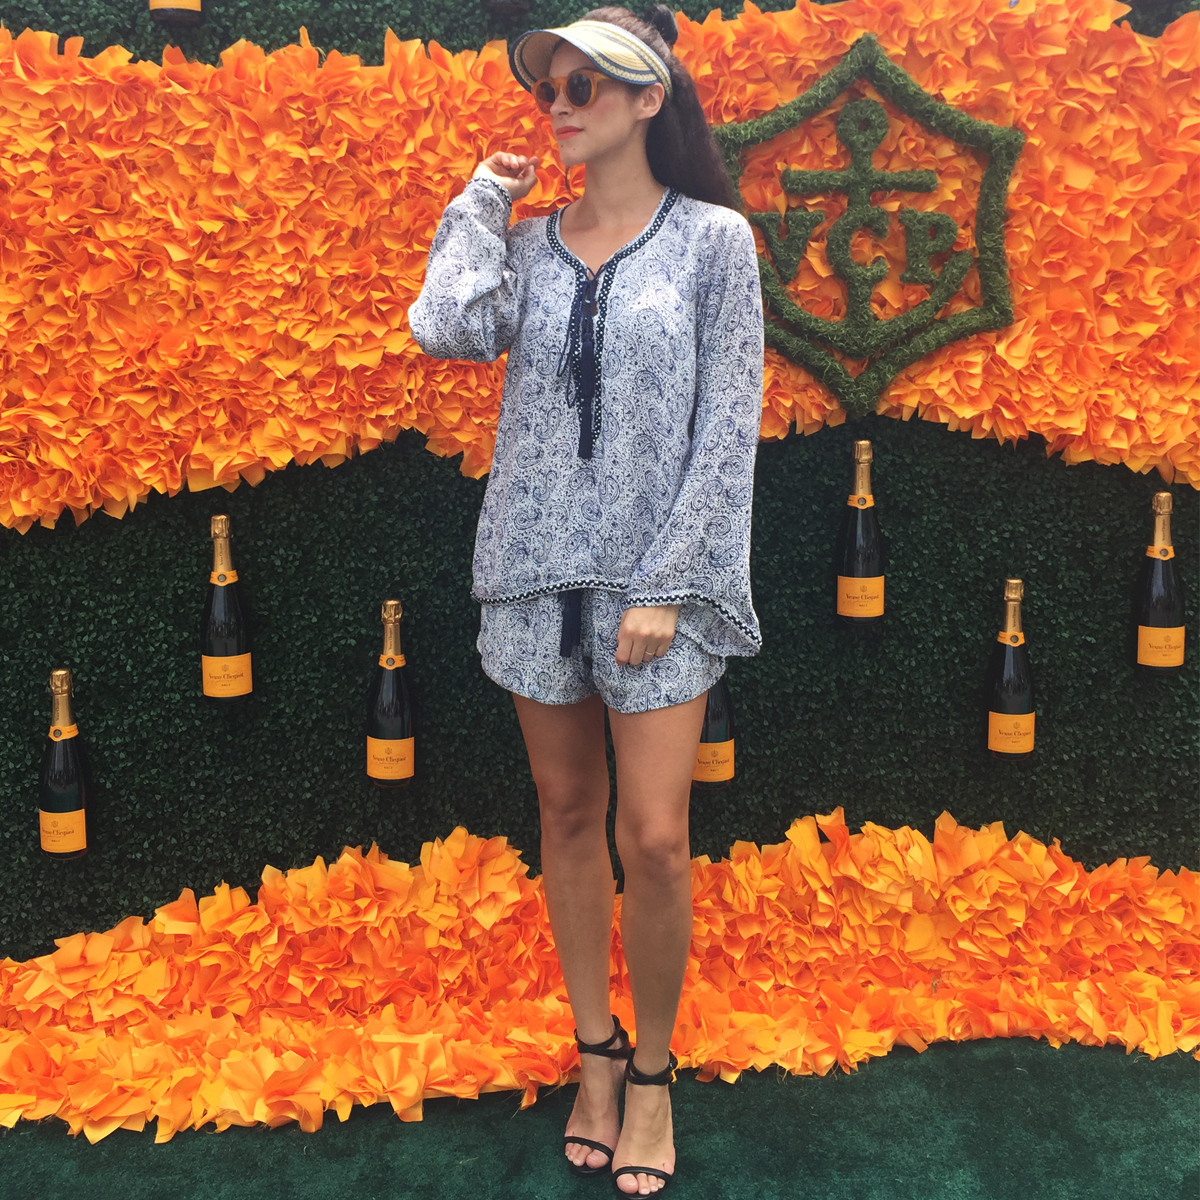 In New York for the Veuve Clicquot Polo Classic